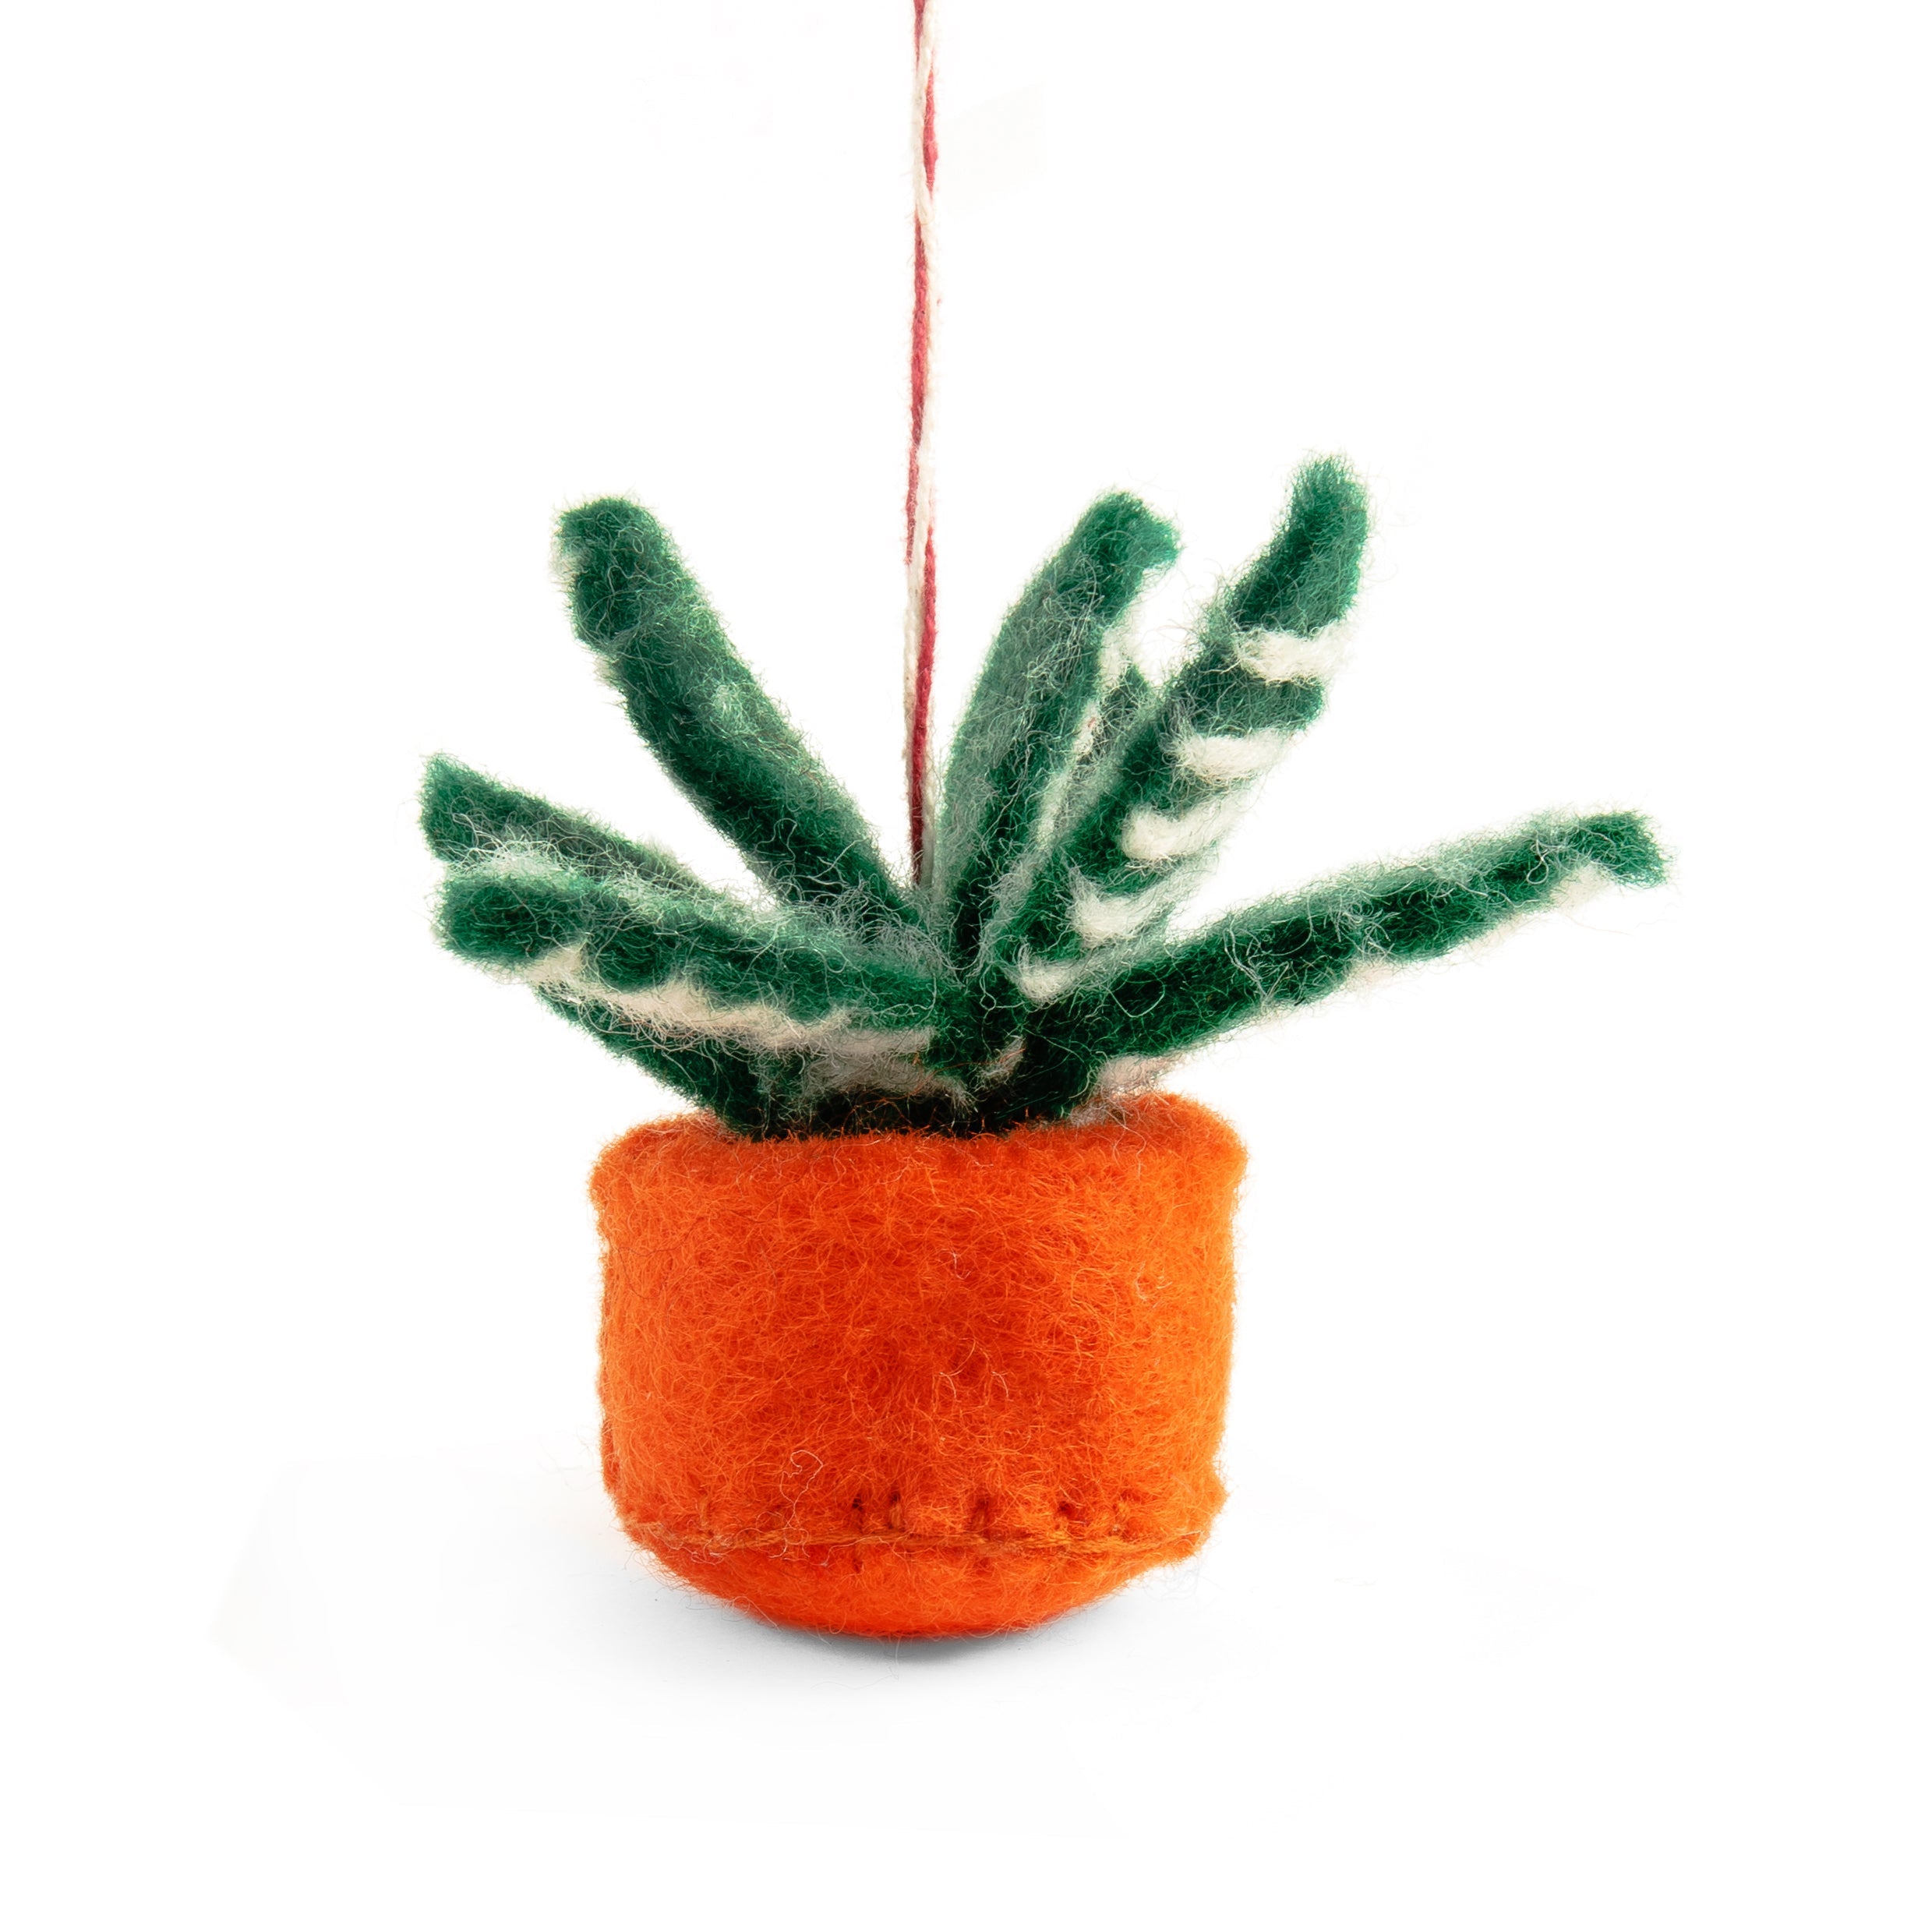 Potted Plant - Christmas Decoration